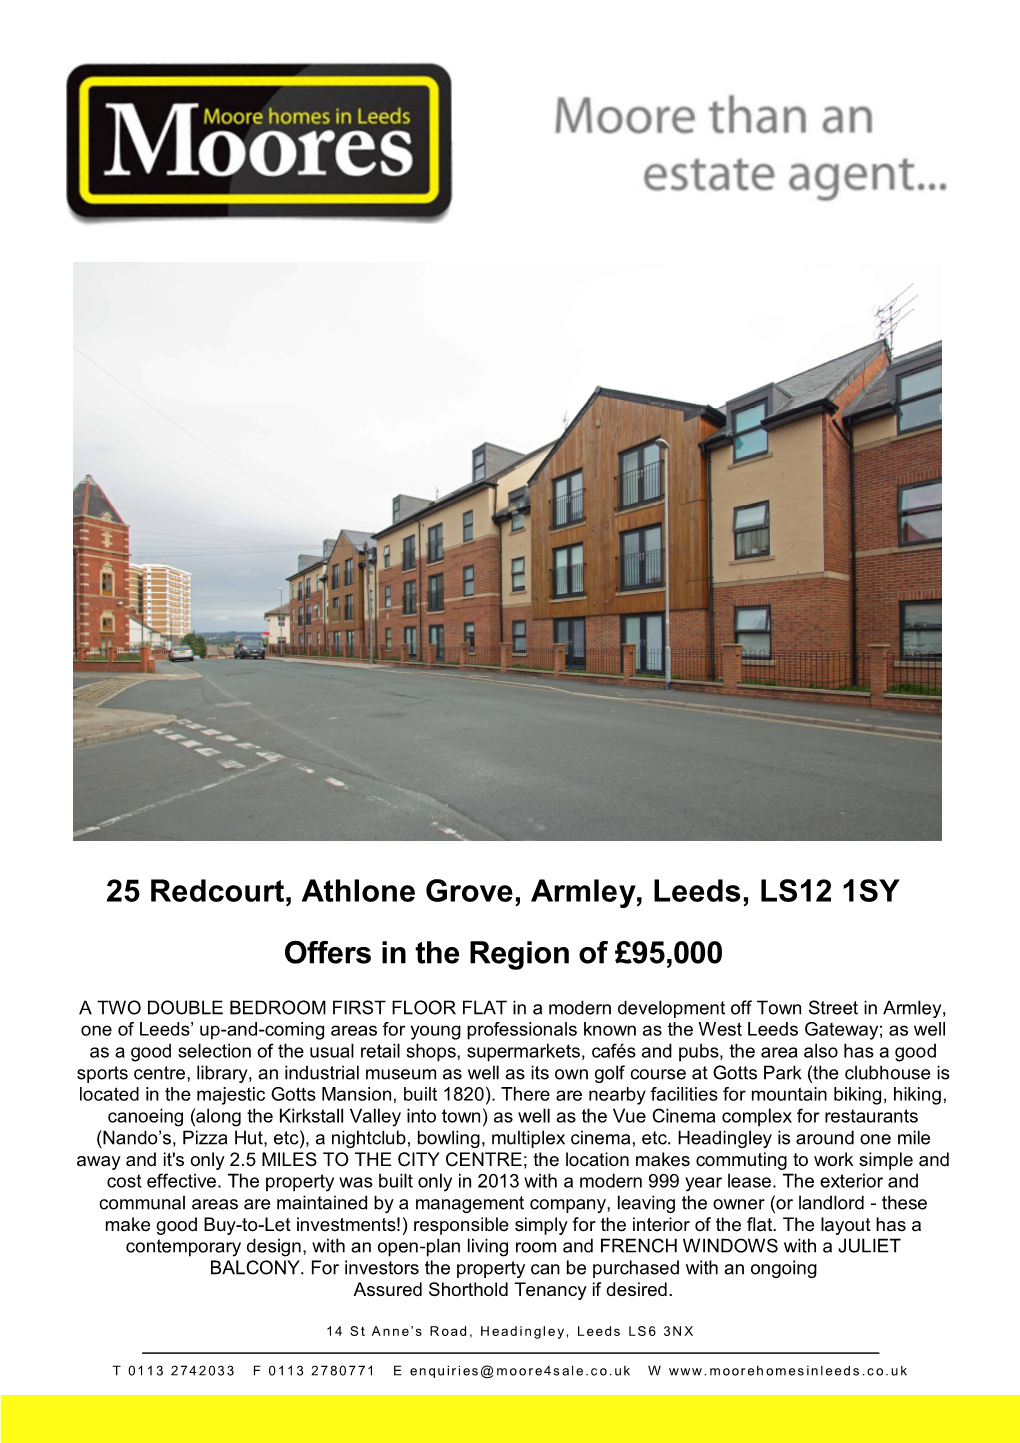 25 Redcourt, Athlone Grove, Armley, Leeds, LS12 1SY Offers in The